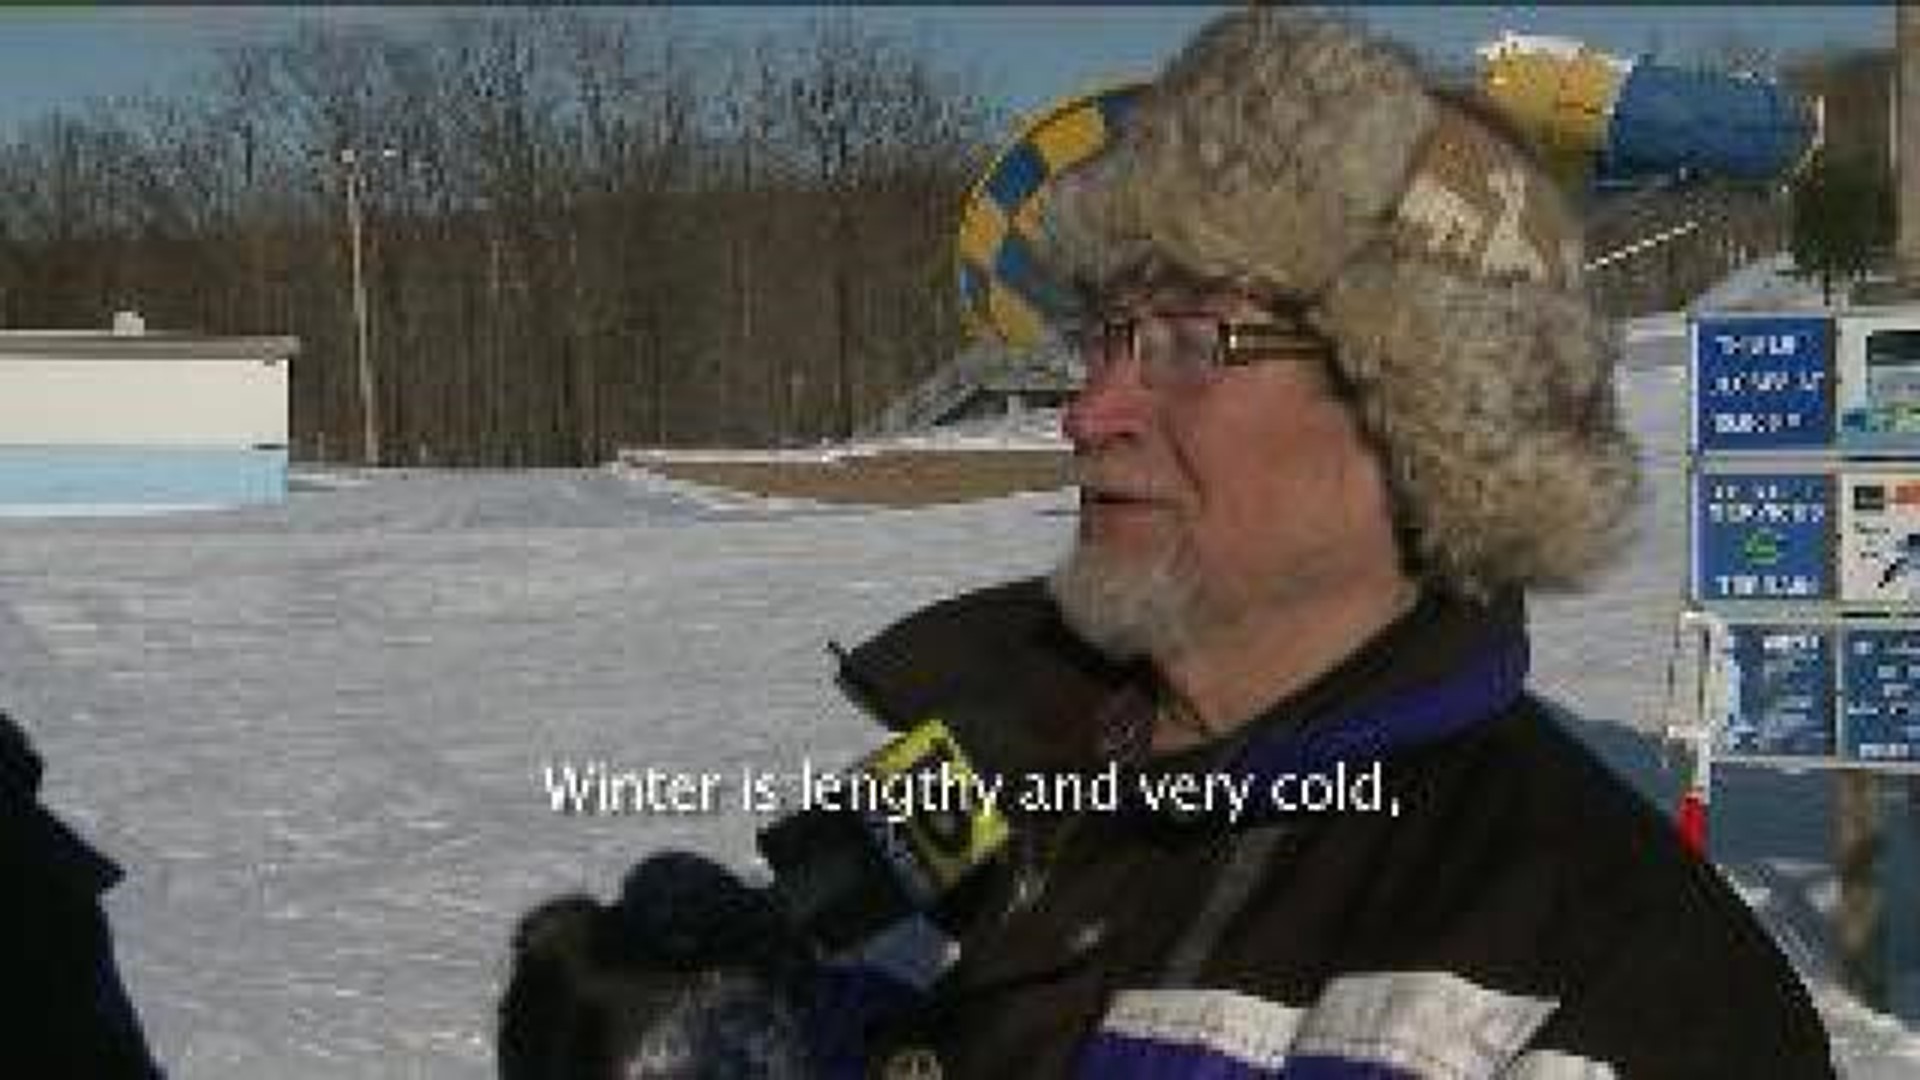 Man From Siberia Weighs In On Cold